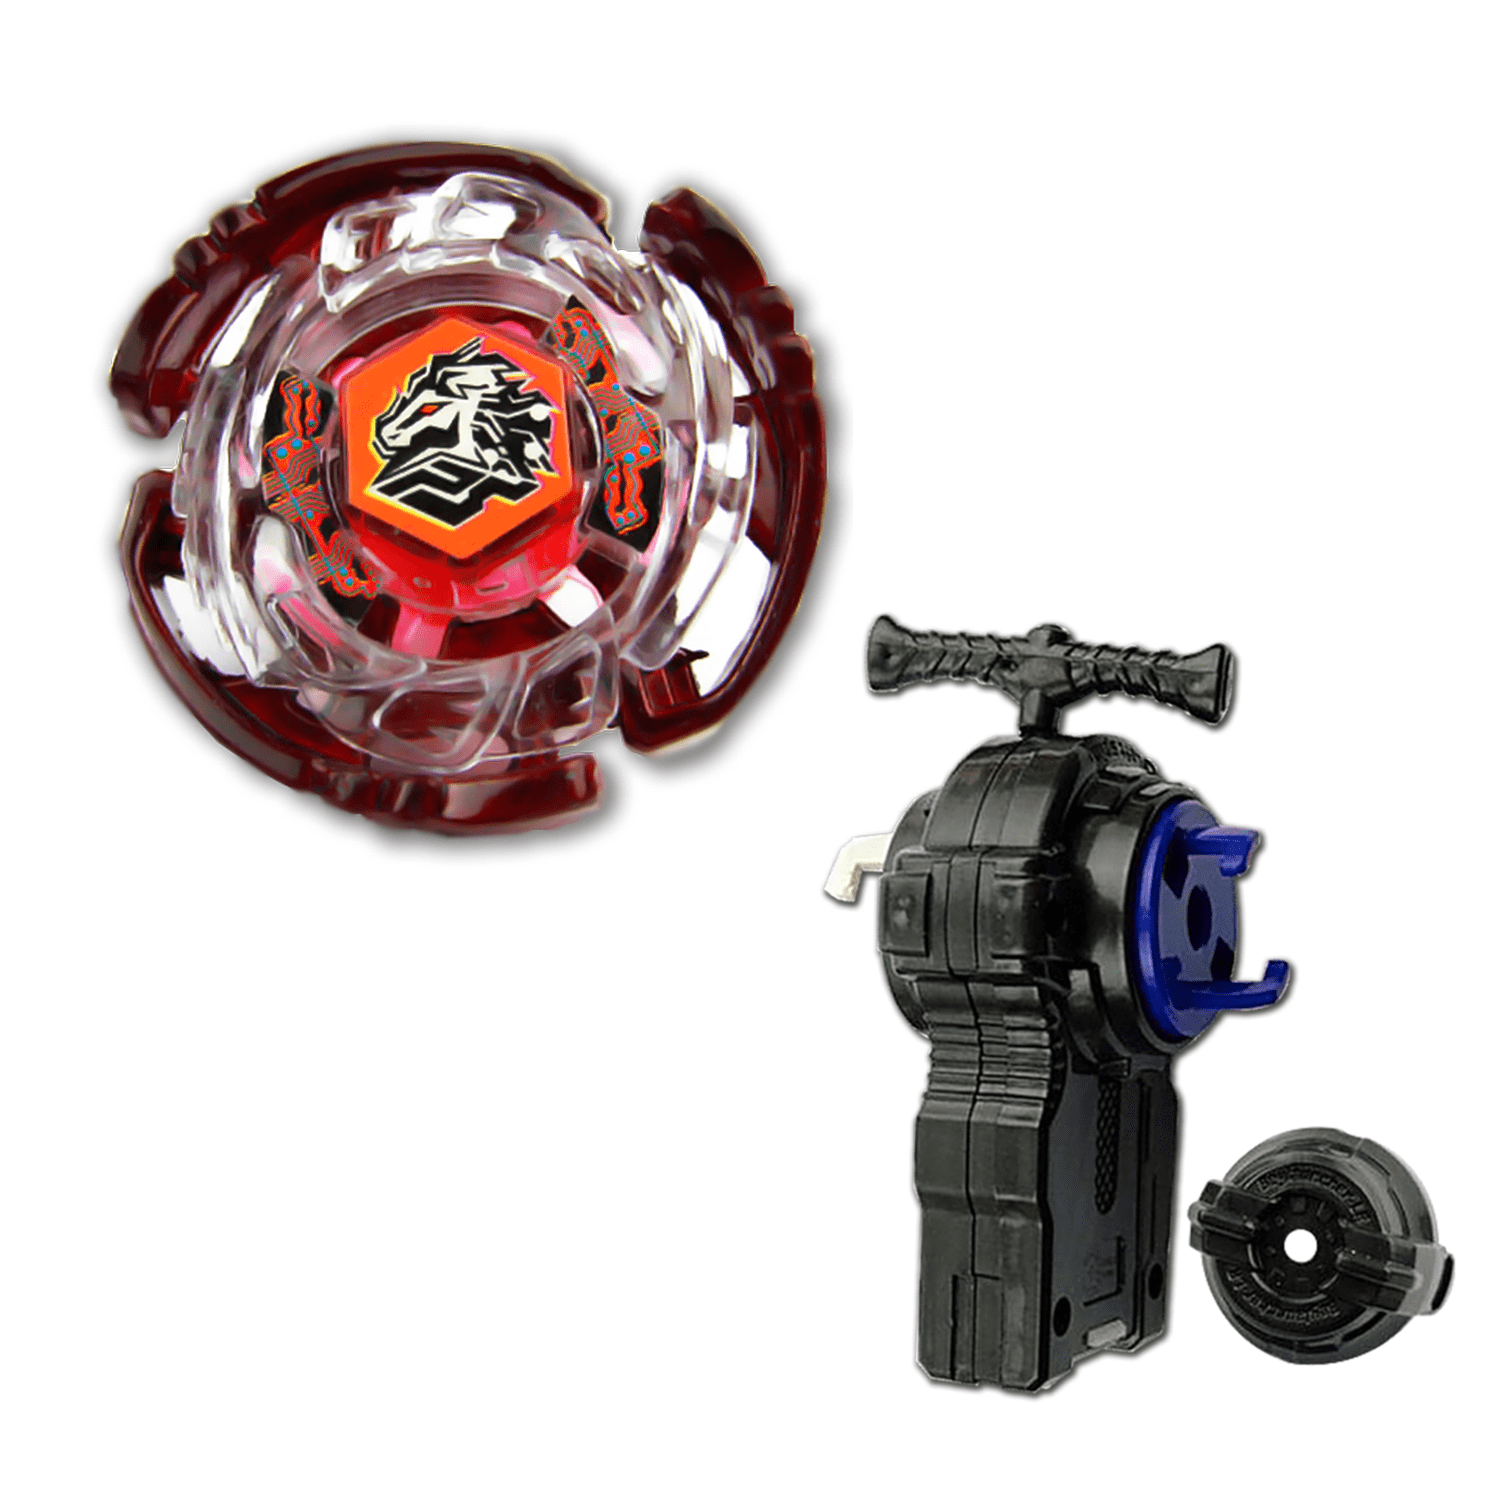 Old Beyblades from childhood : r/Beyblade